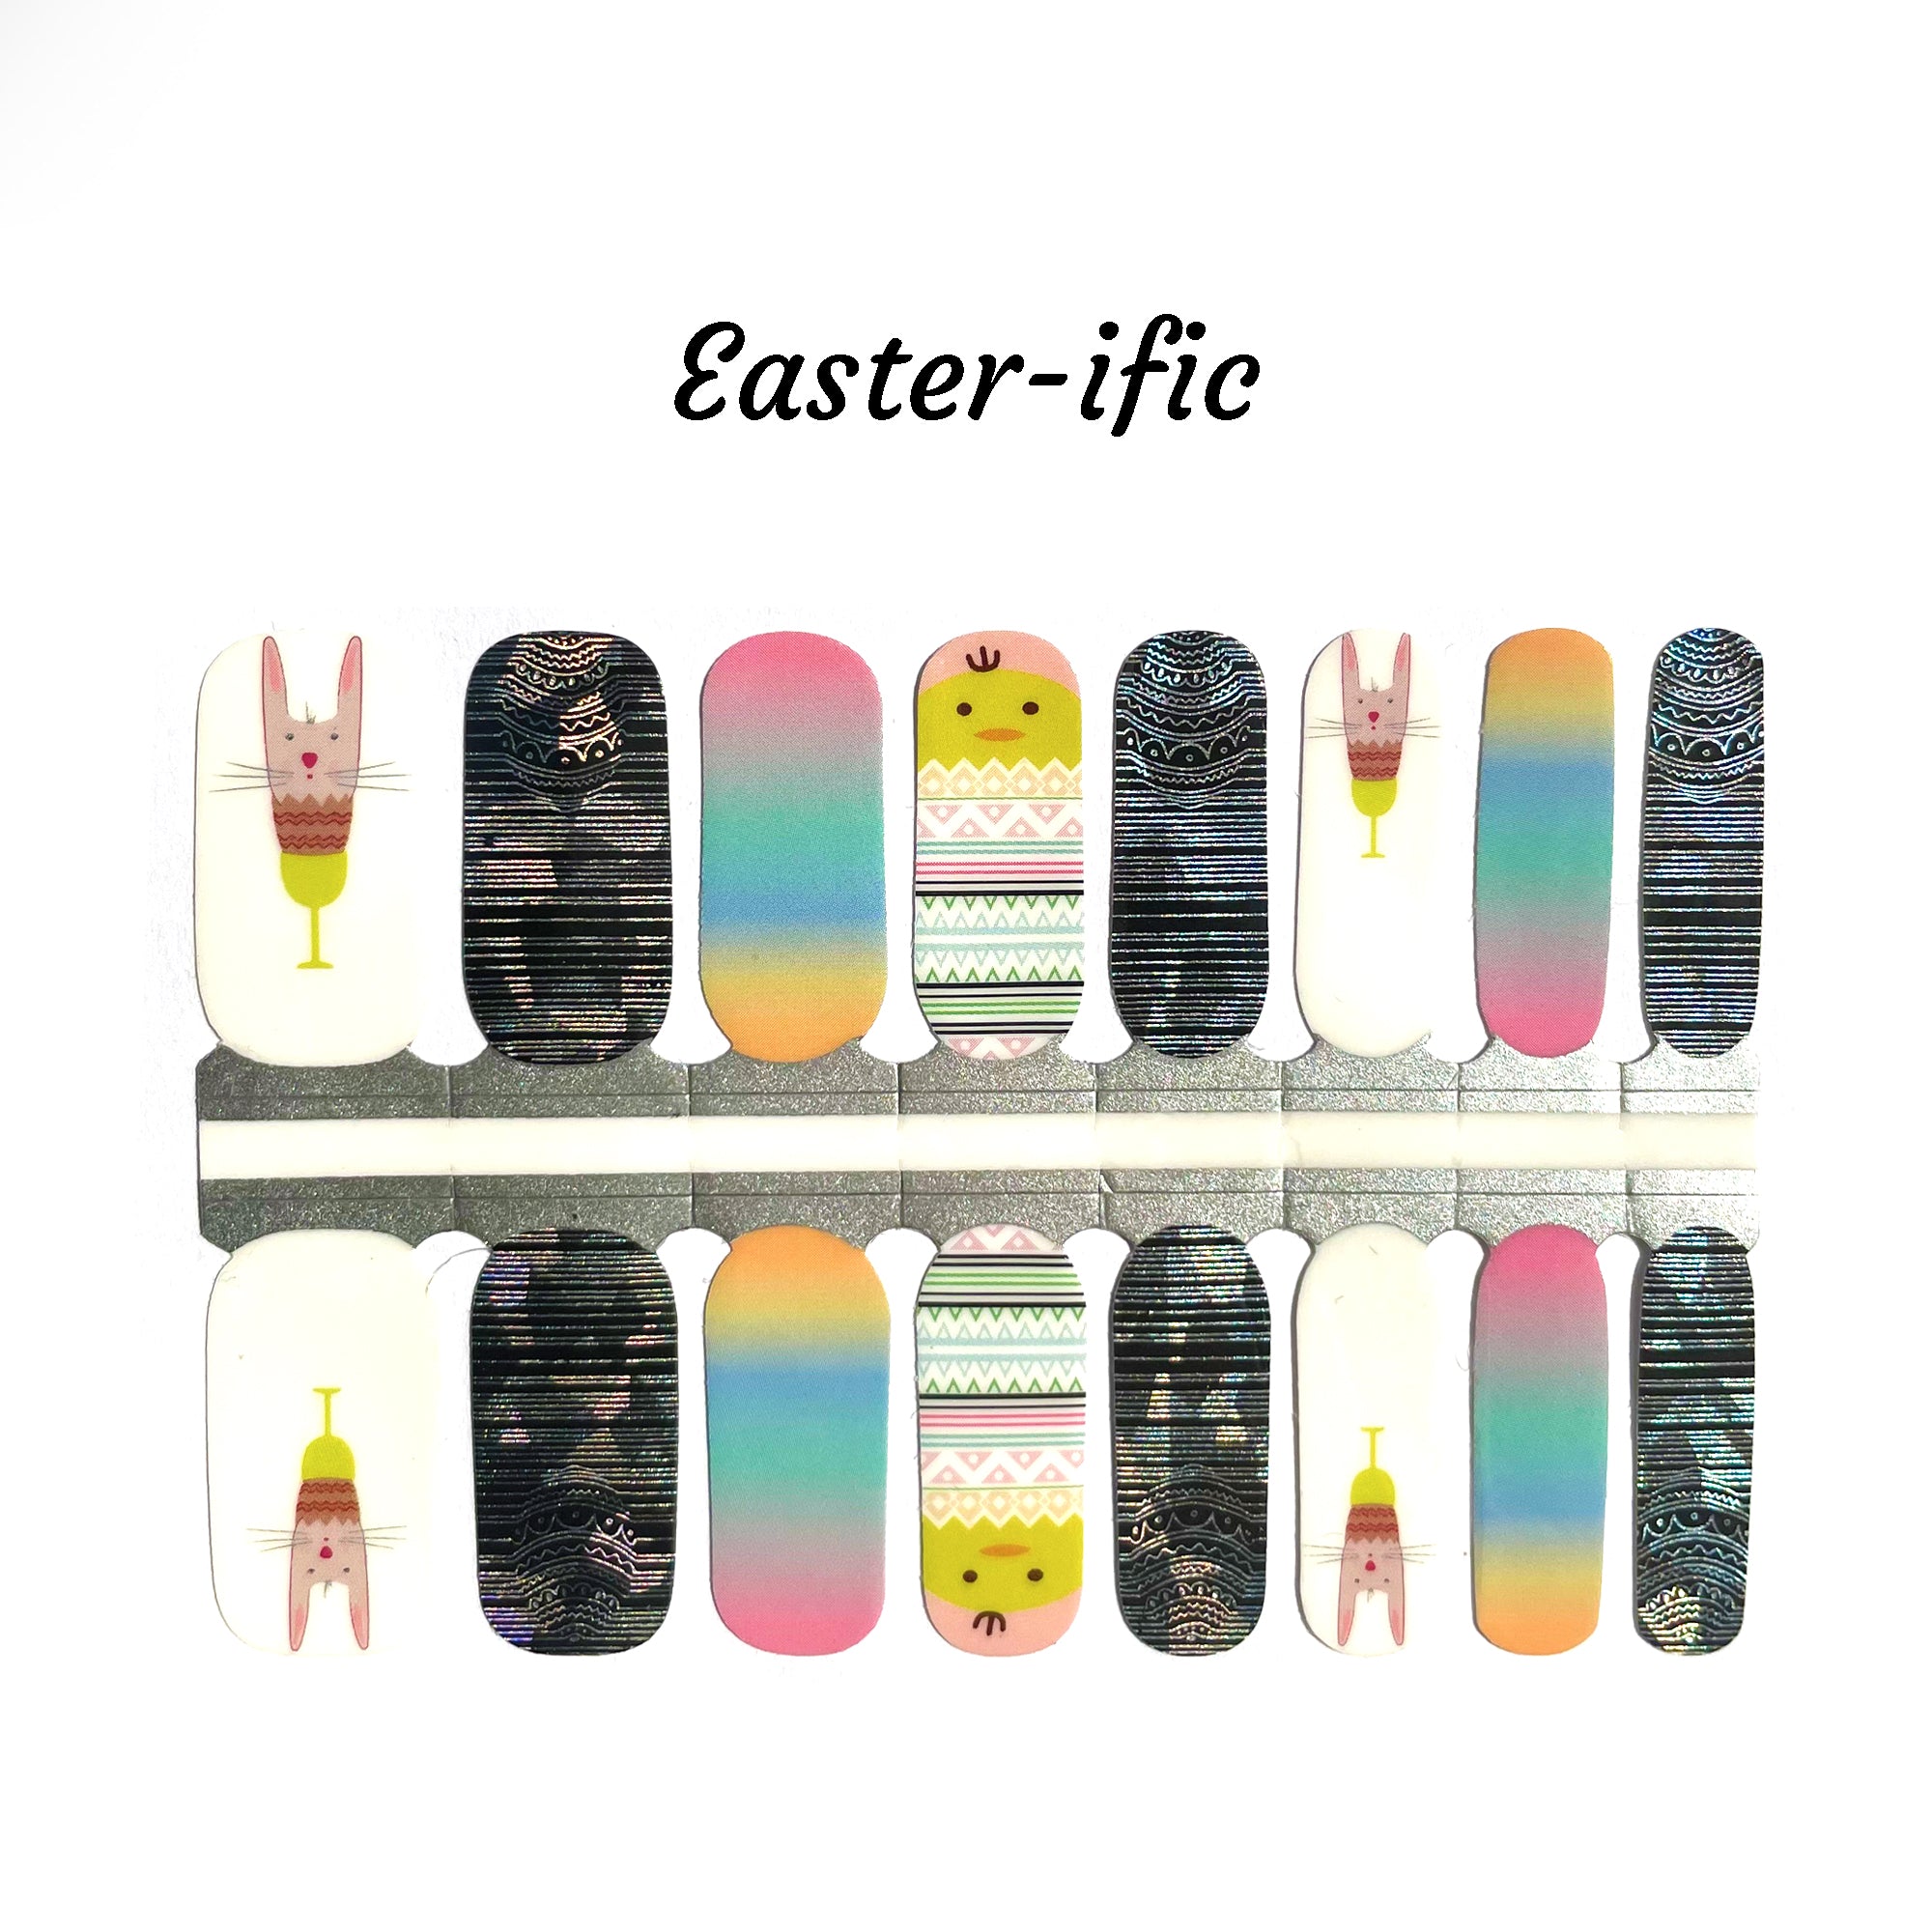 Easter-ific